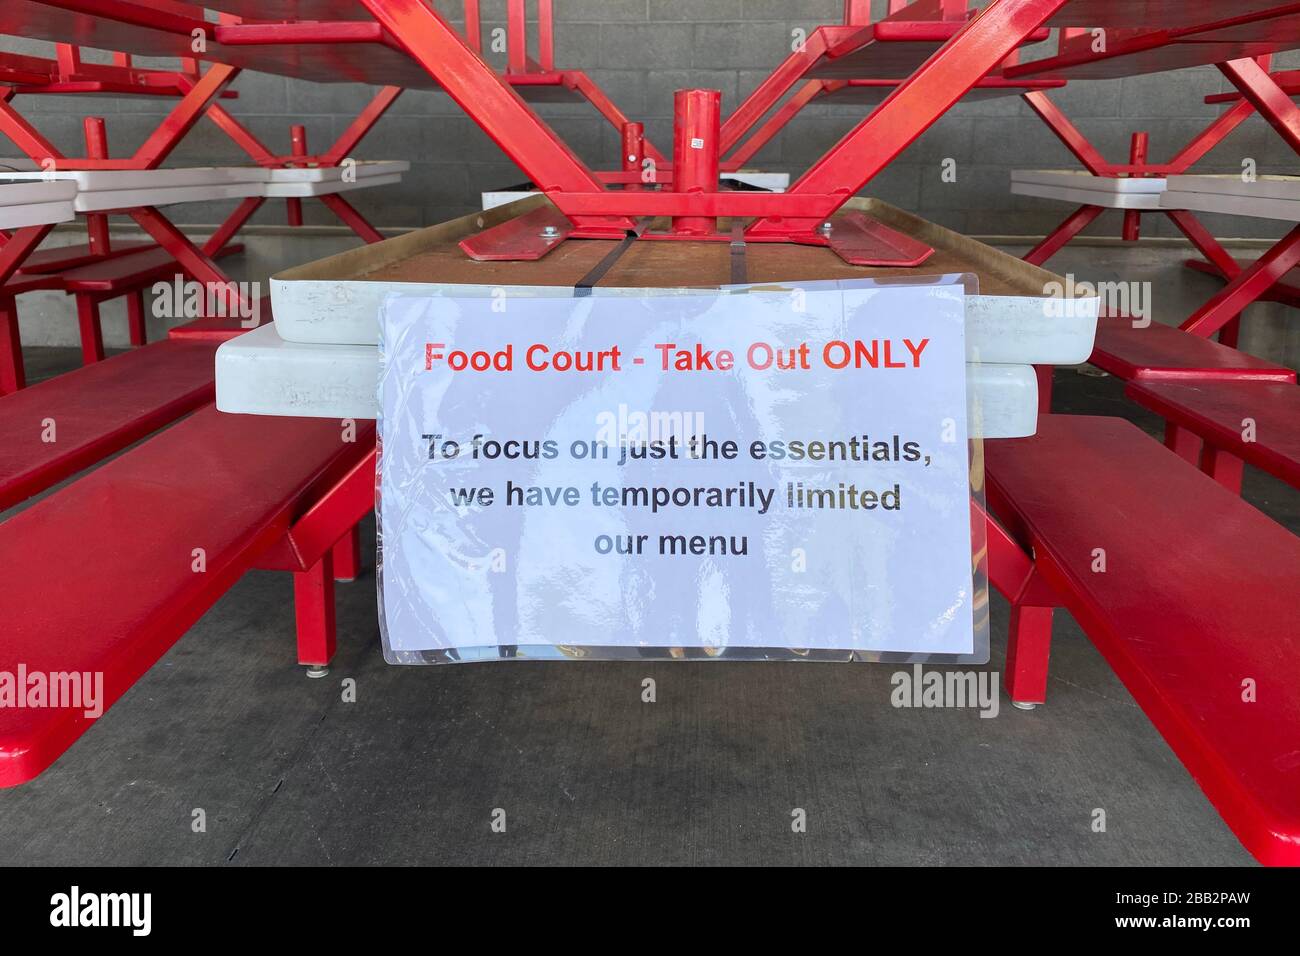 The Costco Wholesale Food Court is closed amid the global coronavirus pandemic outbreak, Sunday, March 29, 2020, in Monterey Park, California, USA. (Photo by IOS/Espa-Images) Stock Photo